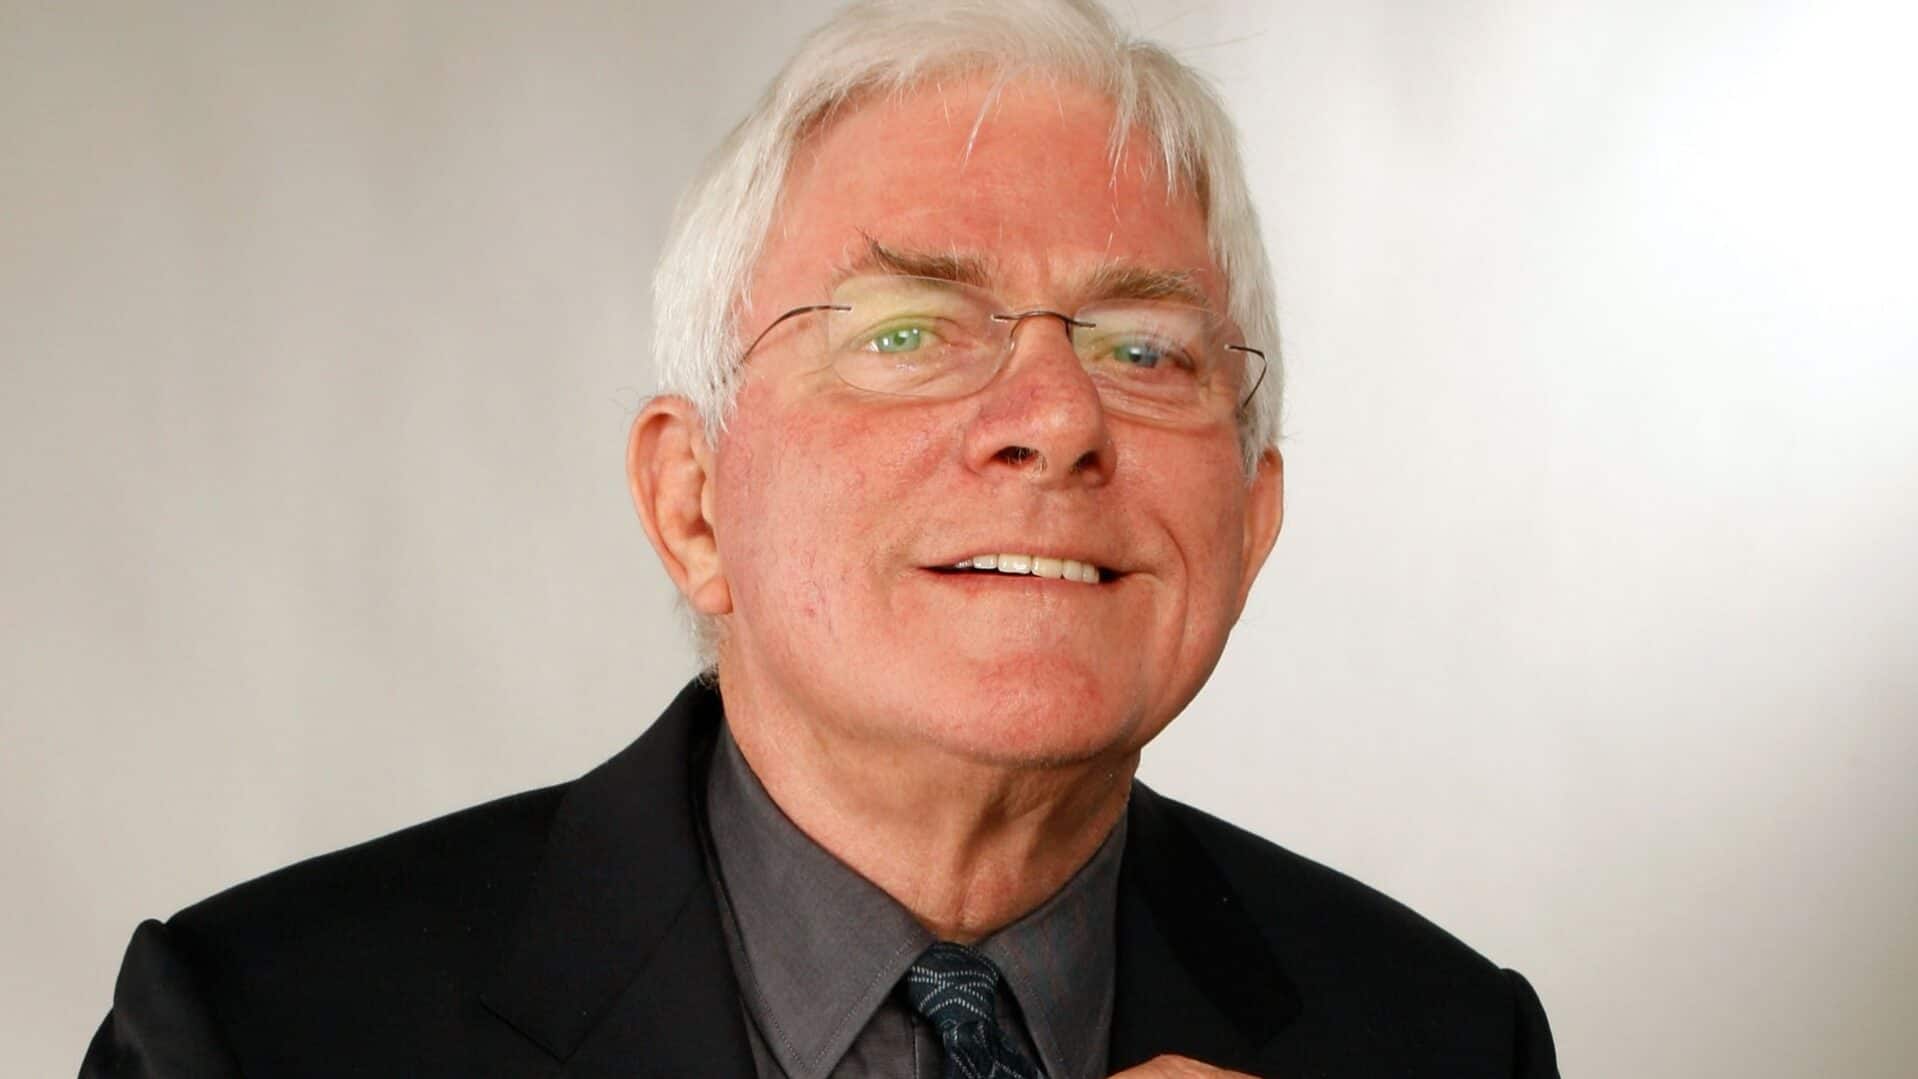 Phil Donahue's net worth is $150 million